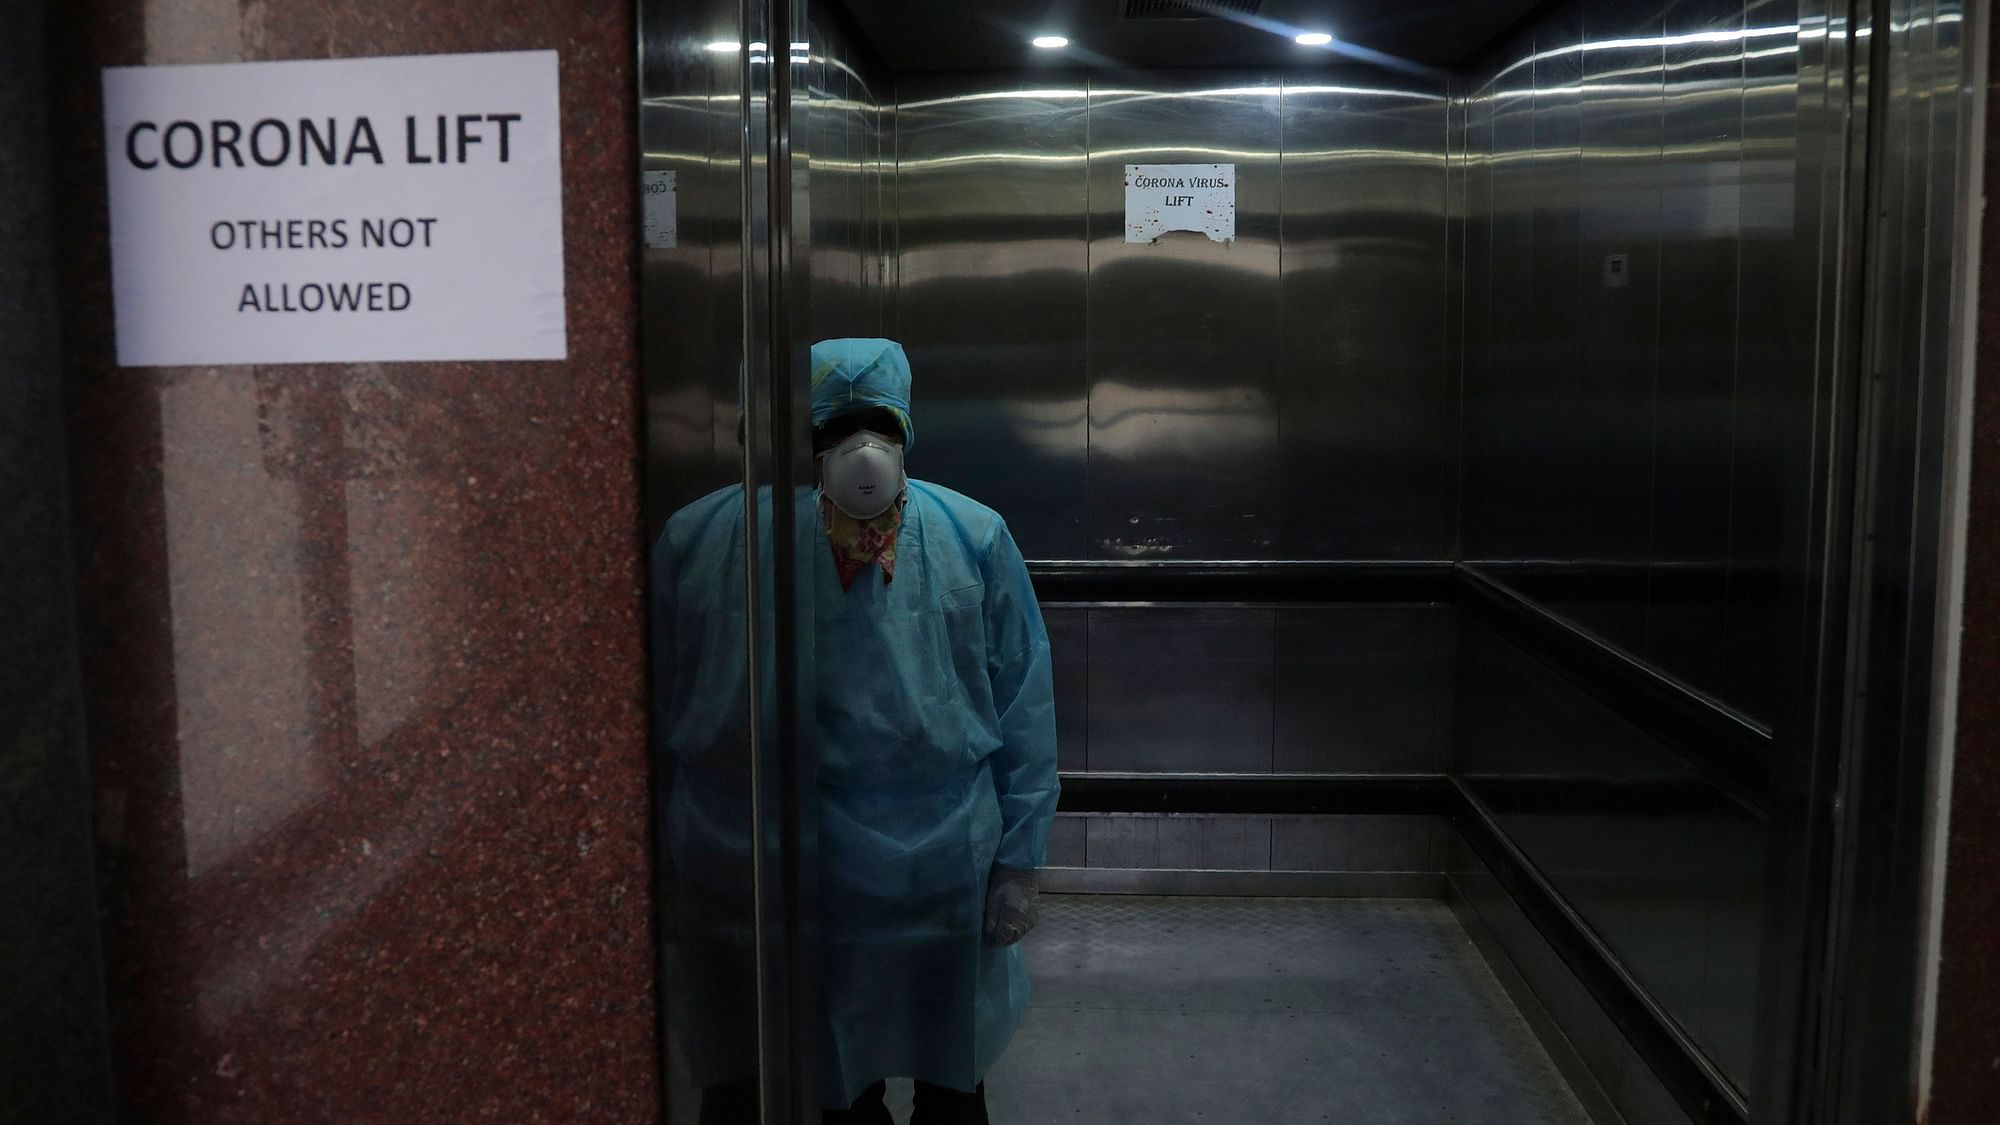 A lift operator stands inside a dedicated lift for people suspected to be infected with the new coronavirus. Image used for representation only.